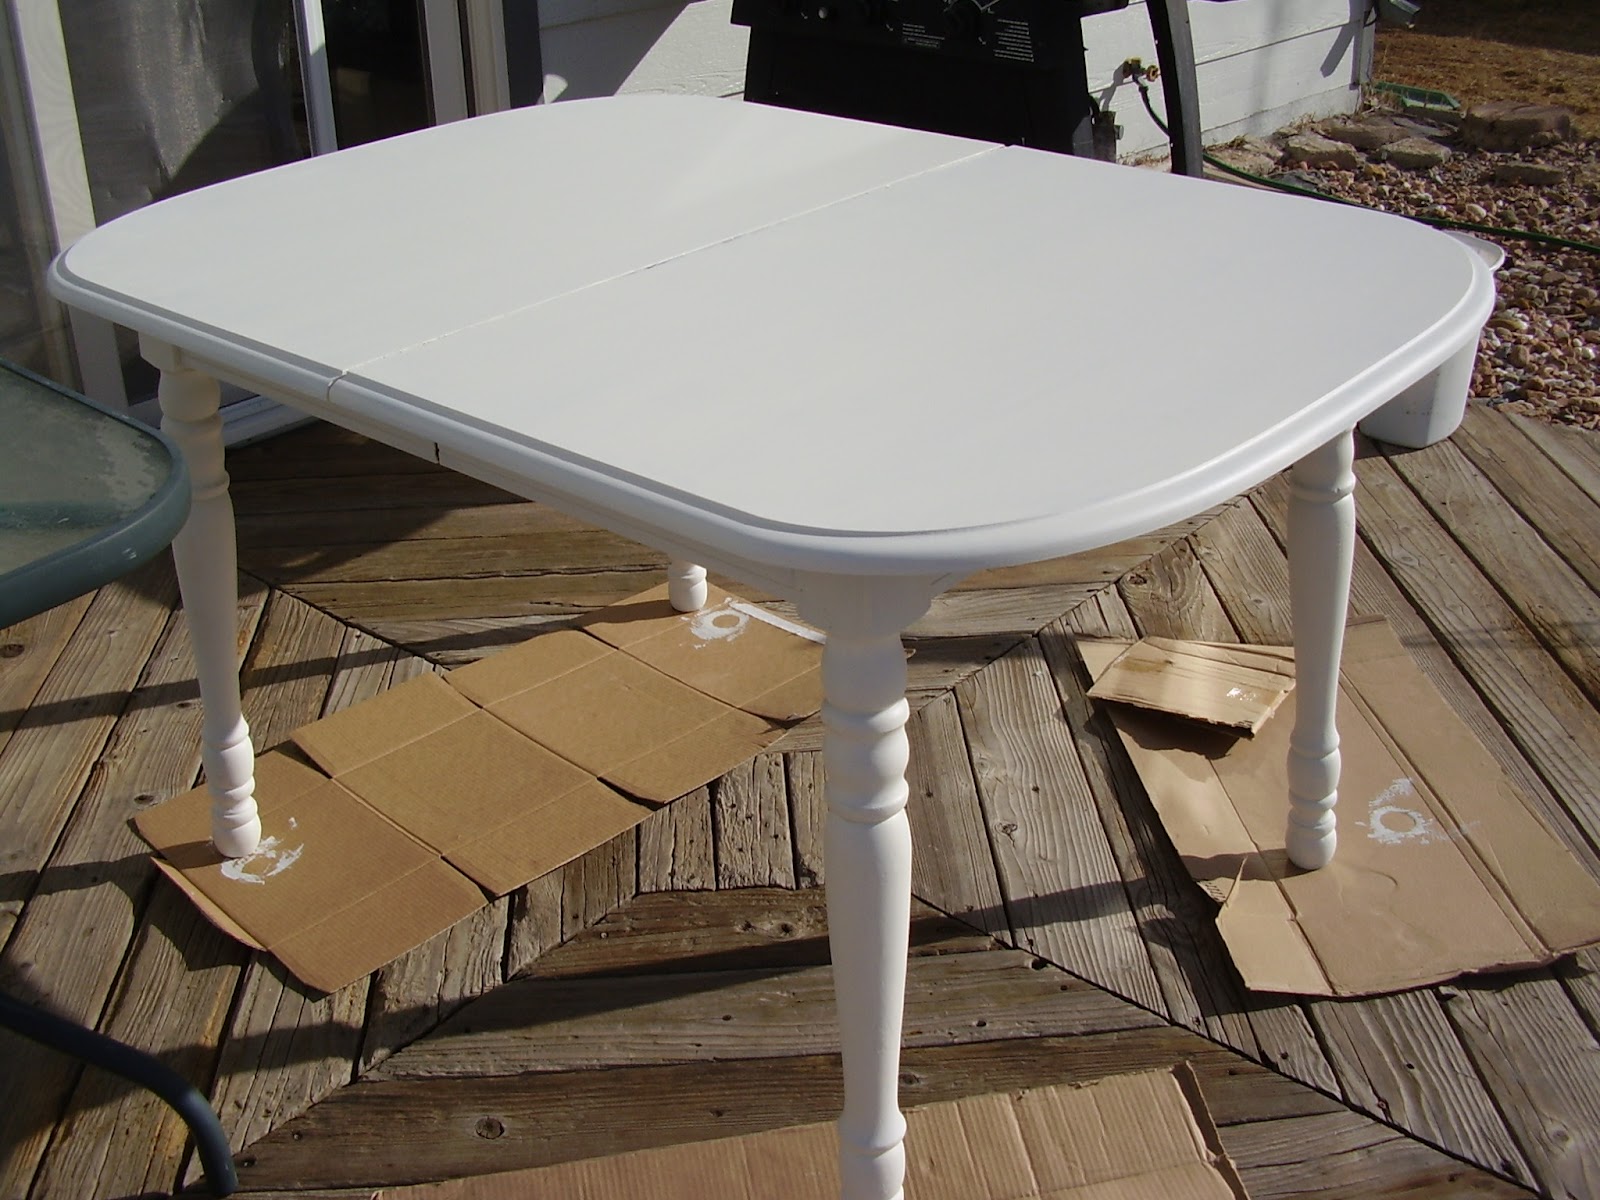 Lewisville Love: Modernize a traditional table using paint!